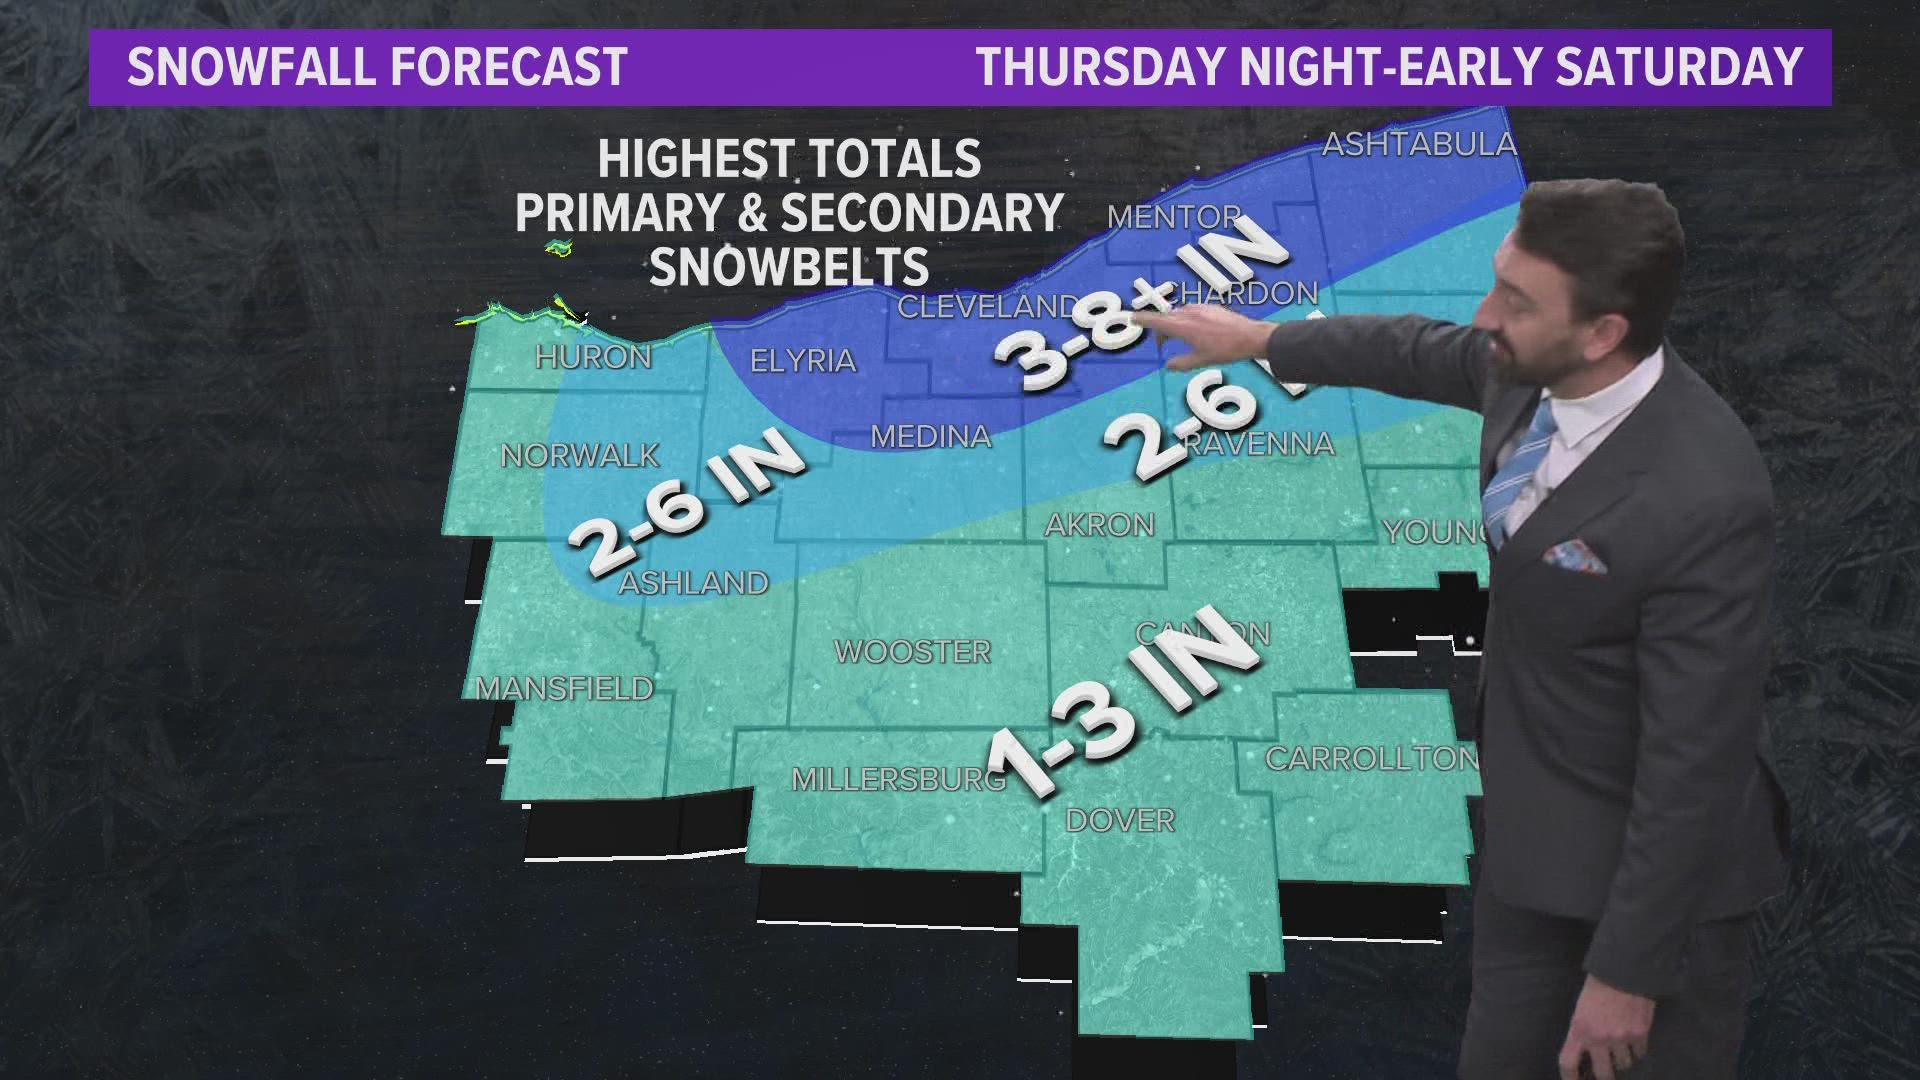 Accumulating snowfall expected to close the work week with colder temperatures following.